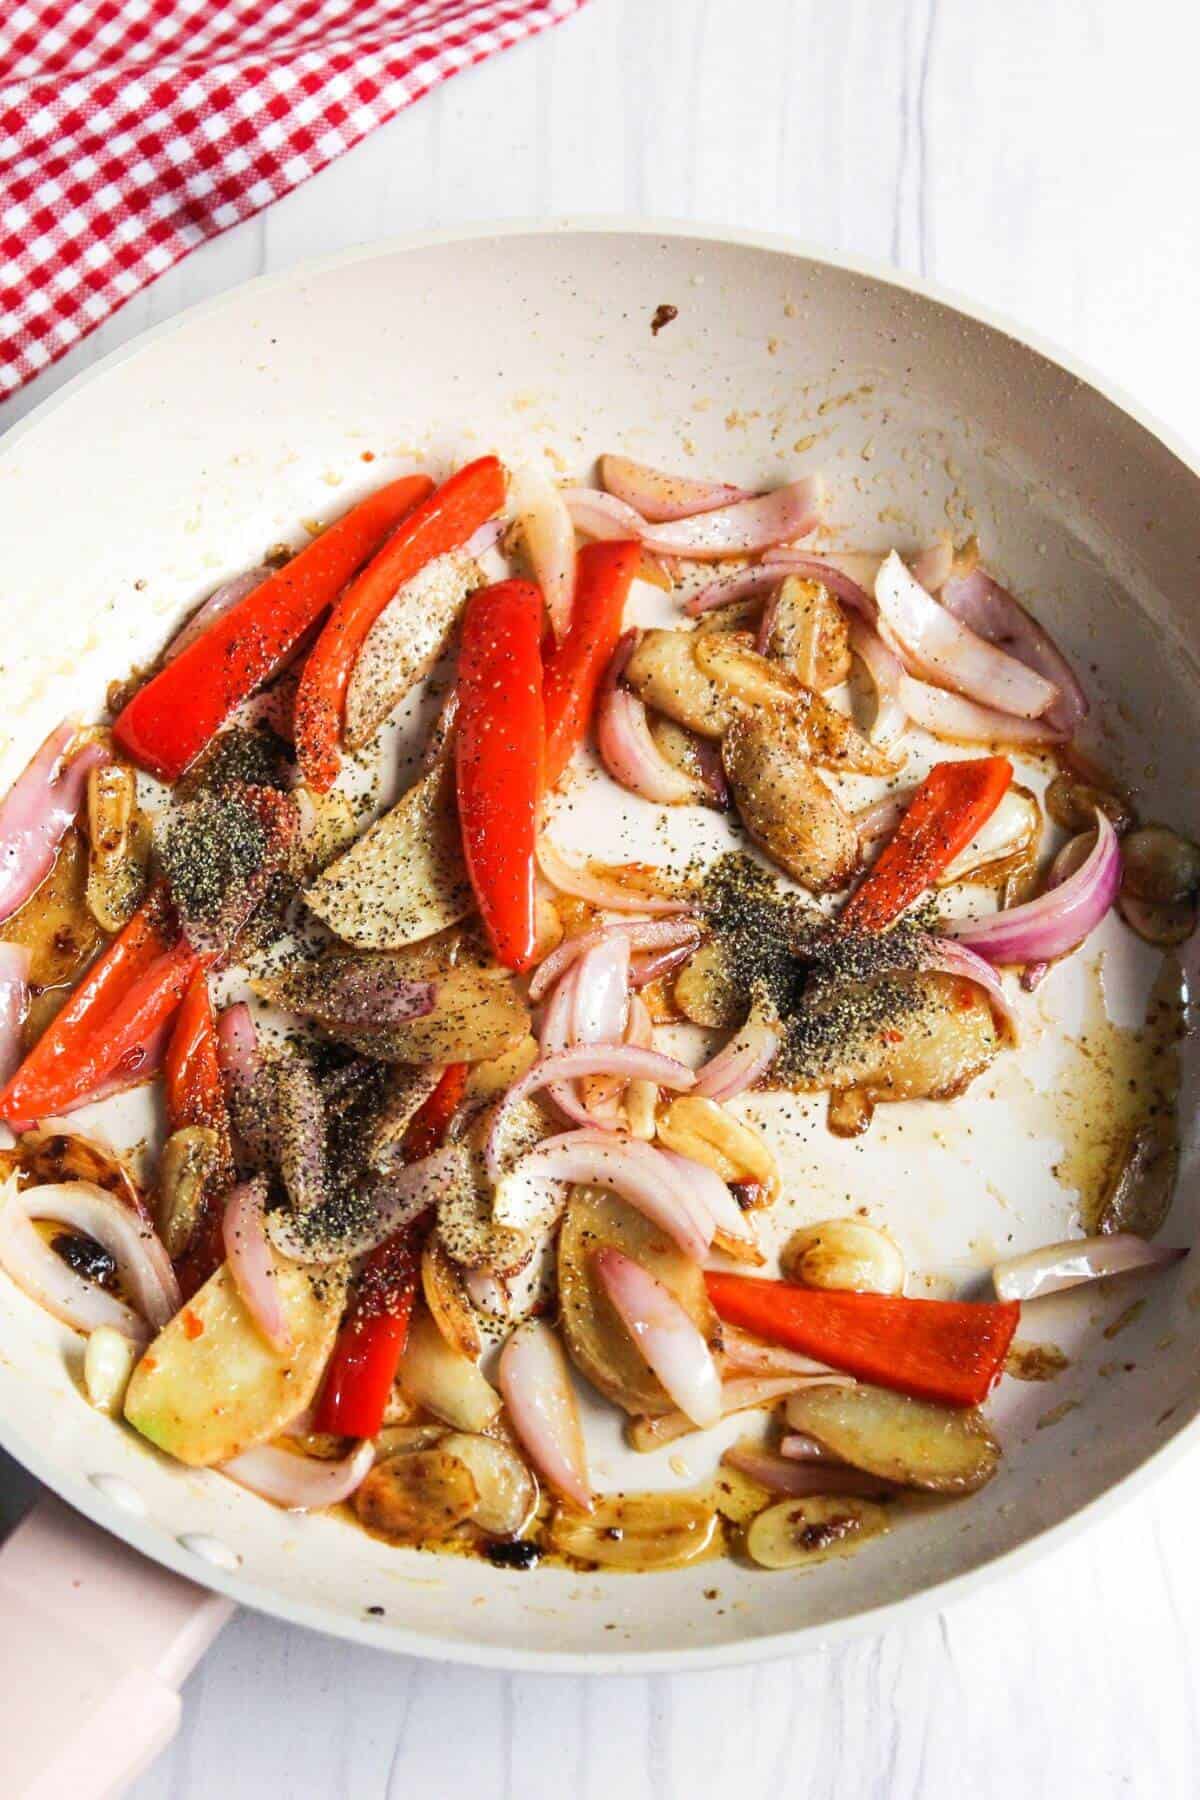 Cooked onion and pepper in skillet.